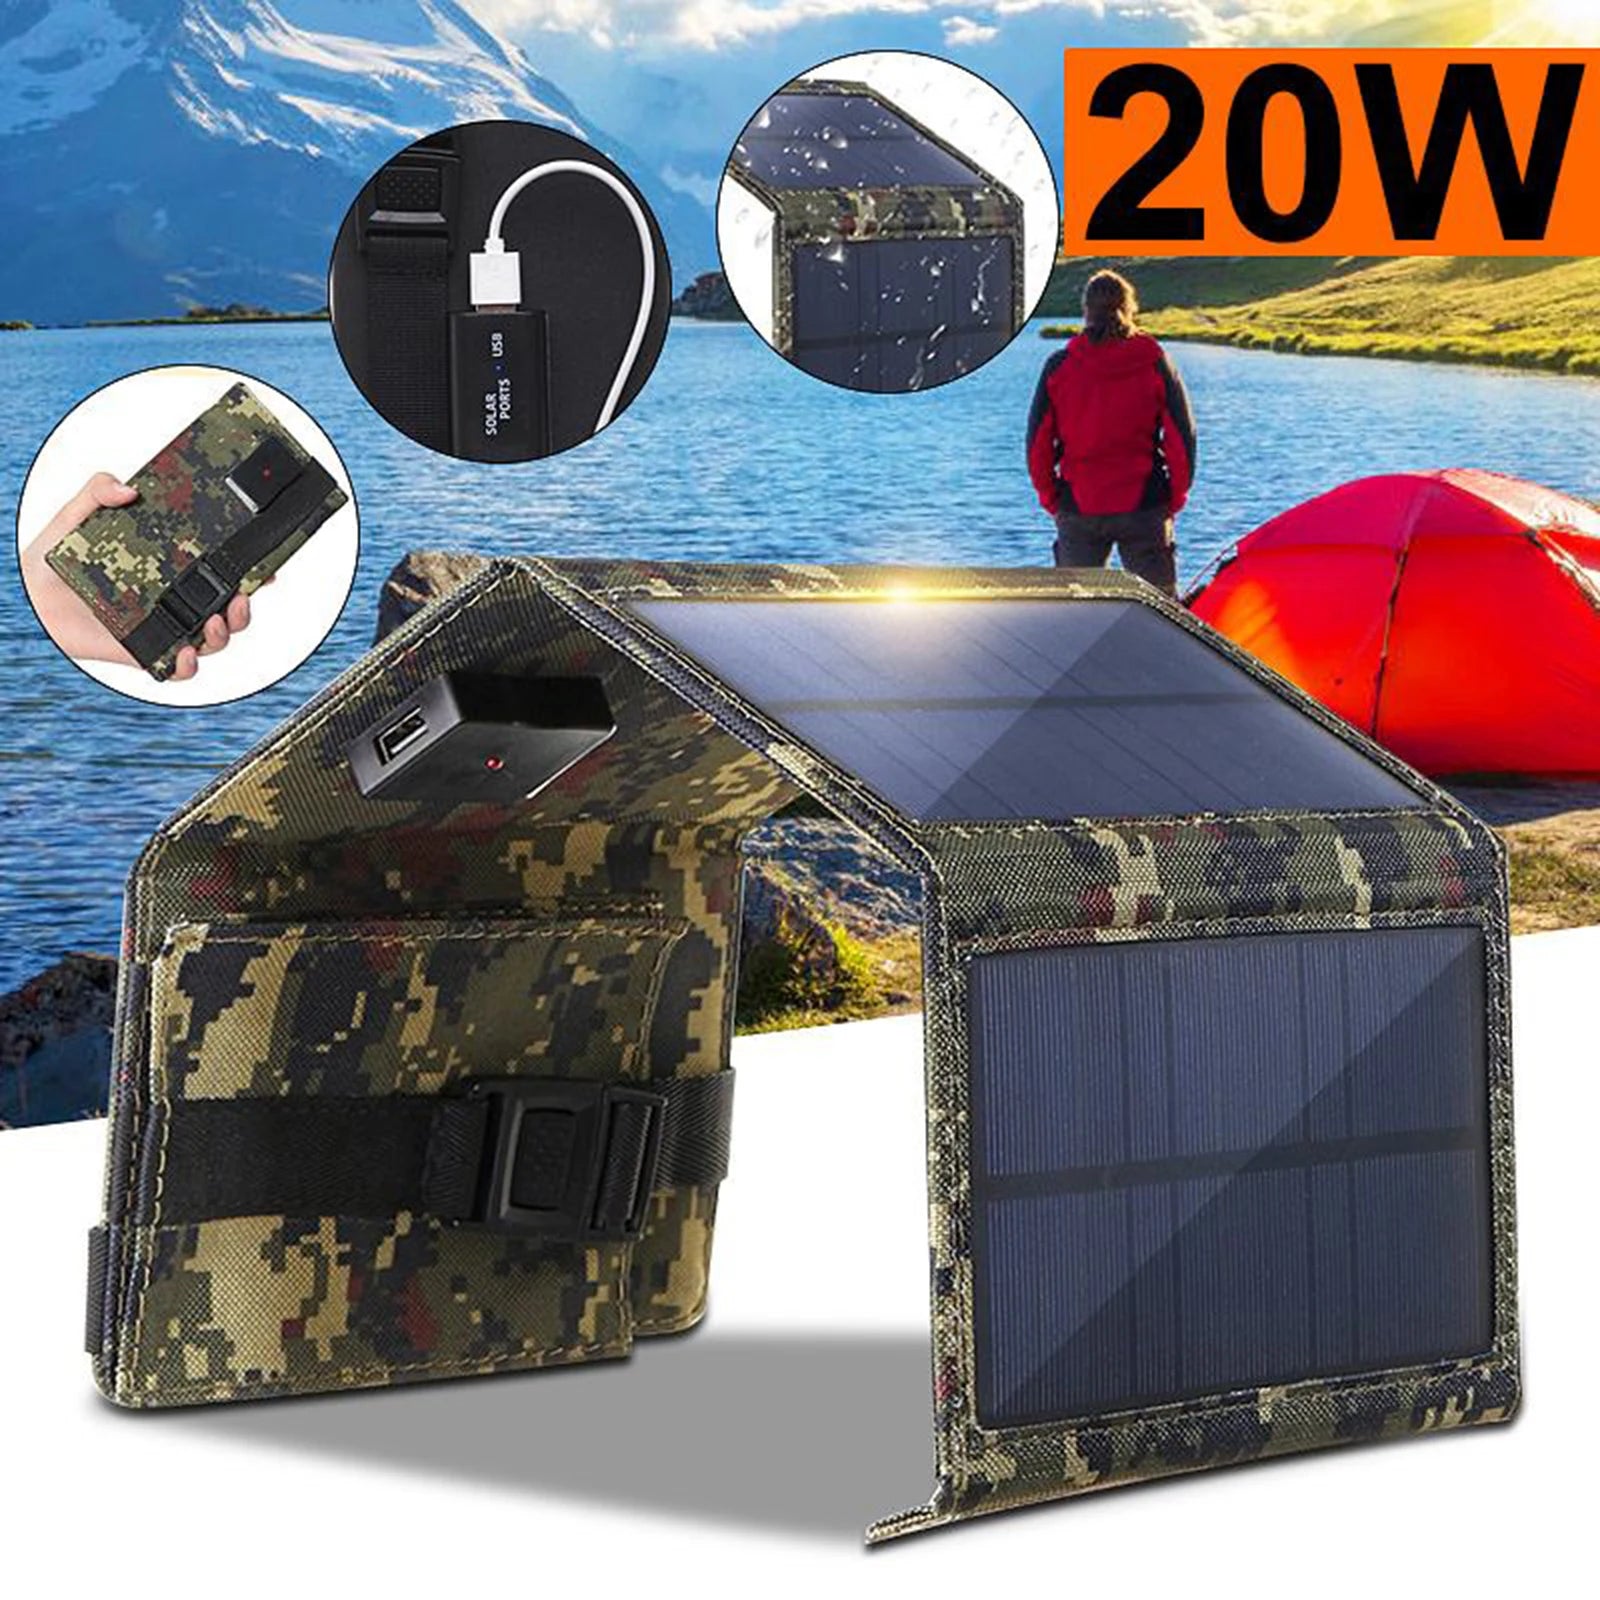 20W Outdoor Foldable Solar Panel, Portable and reliable power source for camping, hiking, emergencies, and outdoor work.